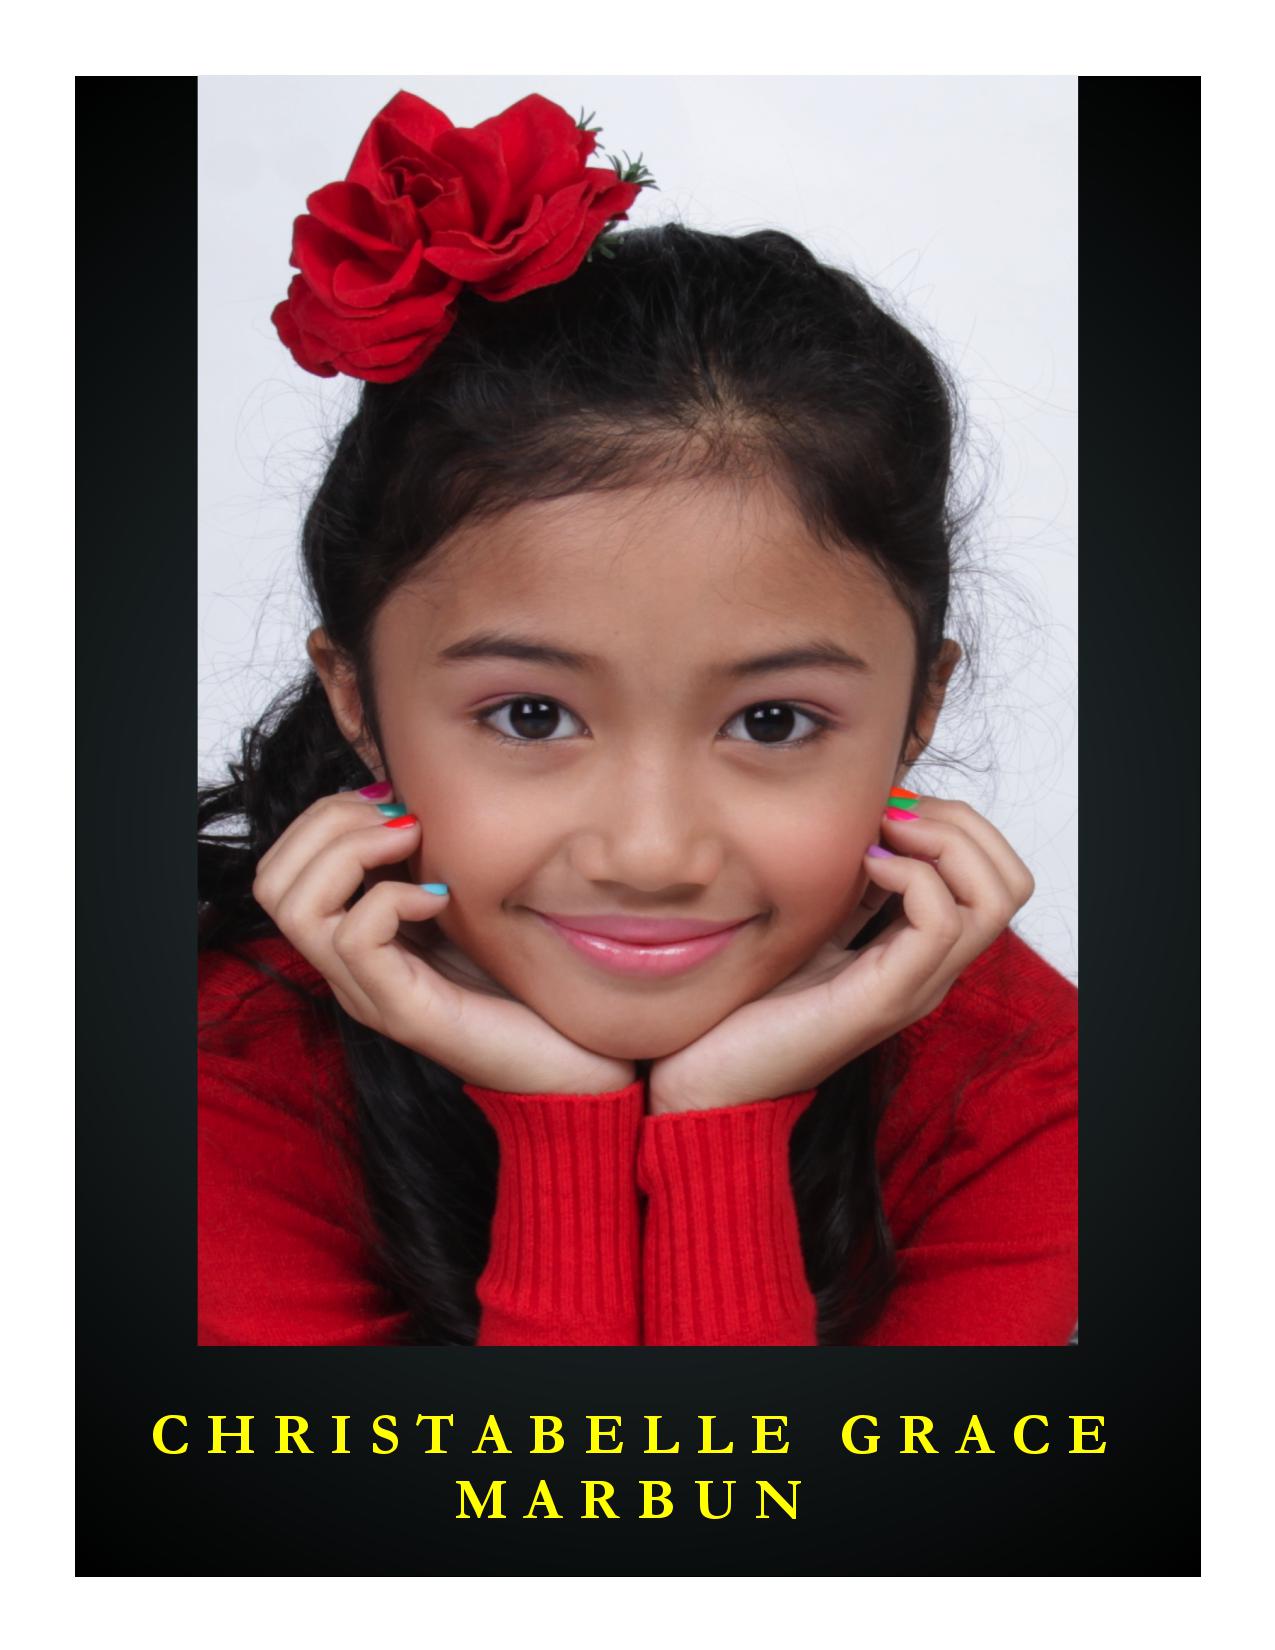 Name: Christabelle Grace Family Name: Marbun Birthday: June 1, 2004 Place: Jakarta Height: 140 cm (4 feet 7) Weight: 30 kg (66.2 lbs) FTV & Sinetron: 112 Movie: 1 Language: English Singing: 1 mini album Website: www.christabelle.my.